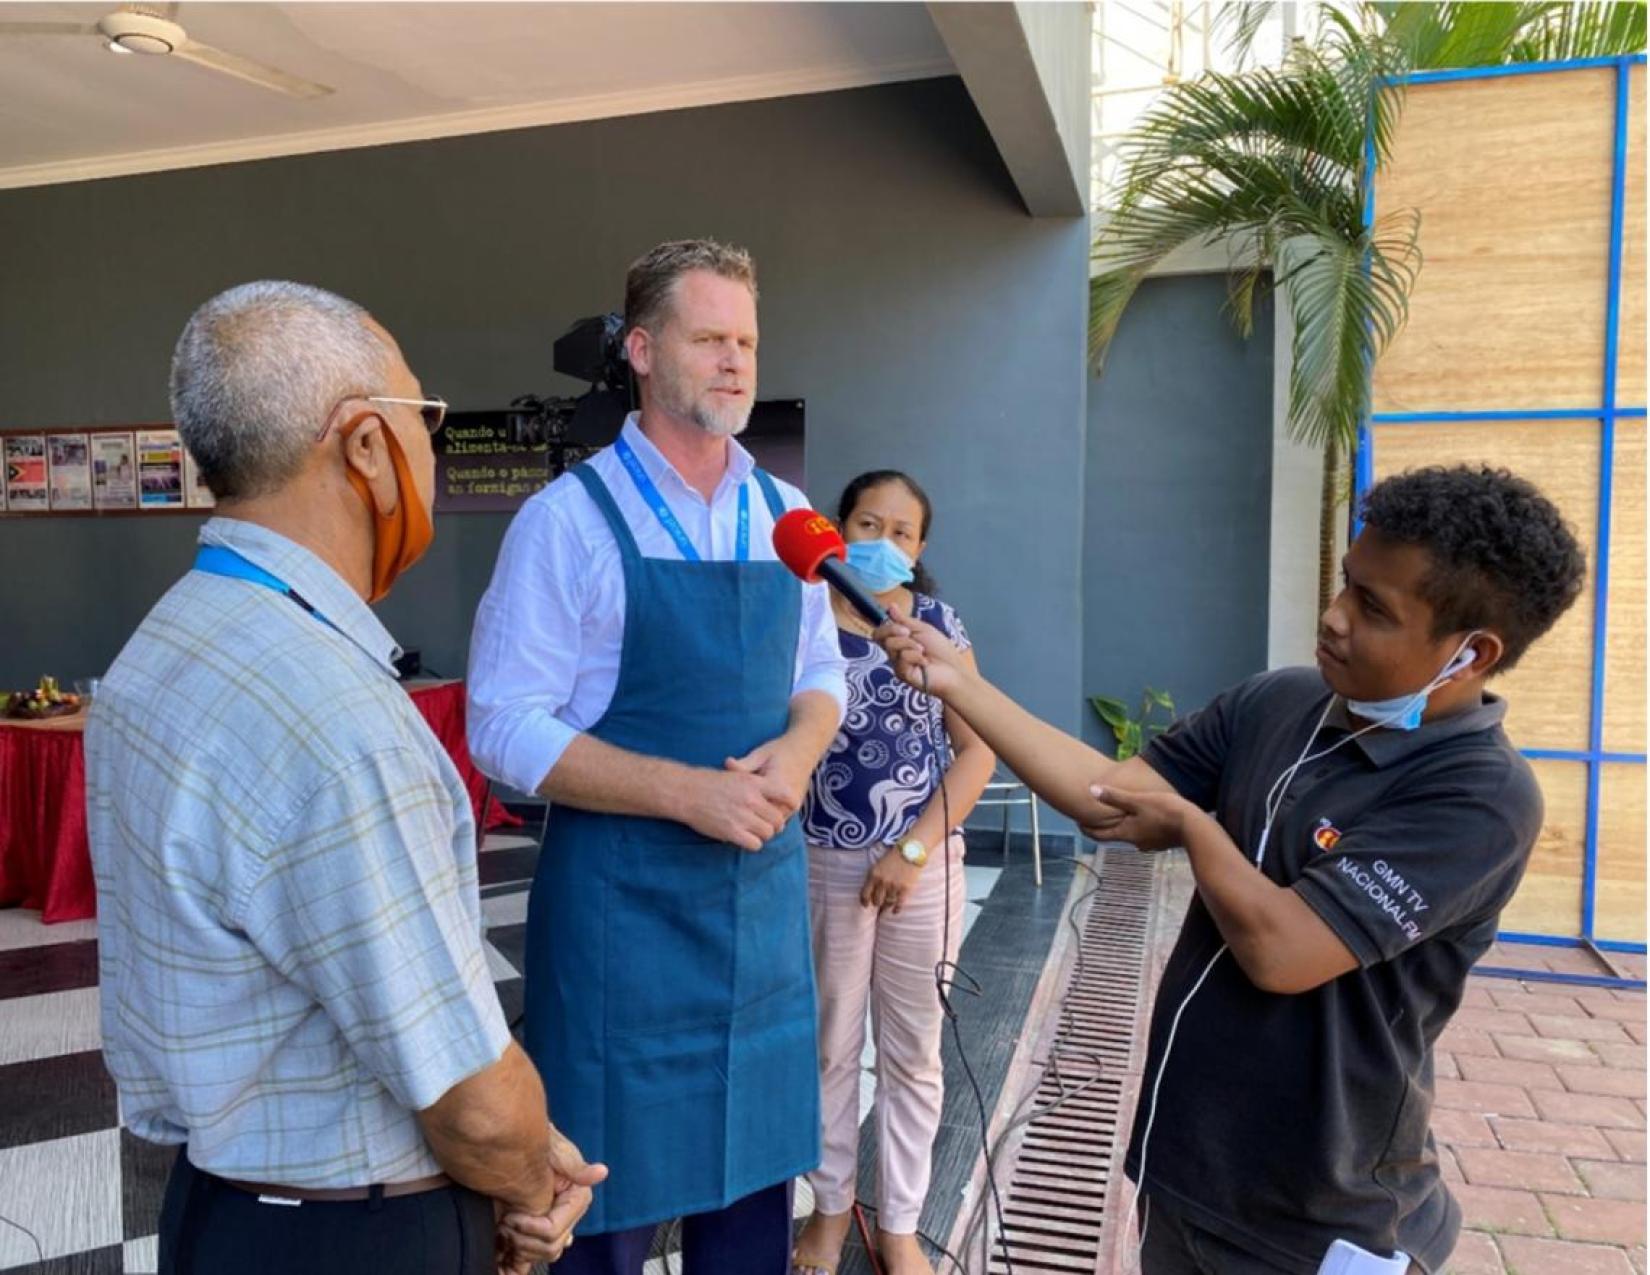 UNICEF's Deputy Representative, Scott Whoolery, talks about the importance of making food both fun and nutritious. Photo courtesy of the European Union in Timor-Leste